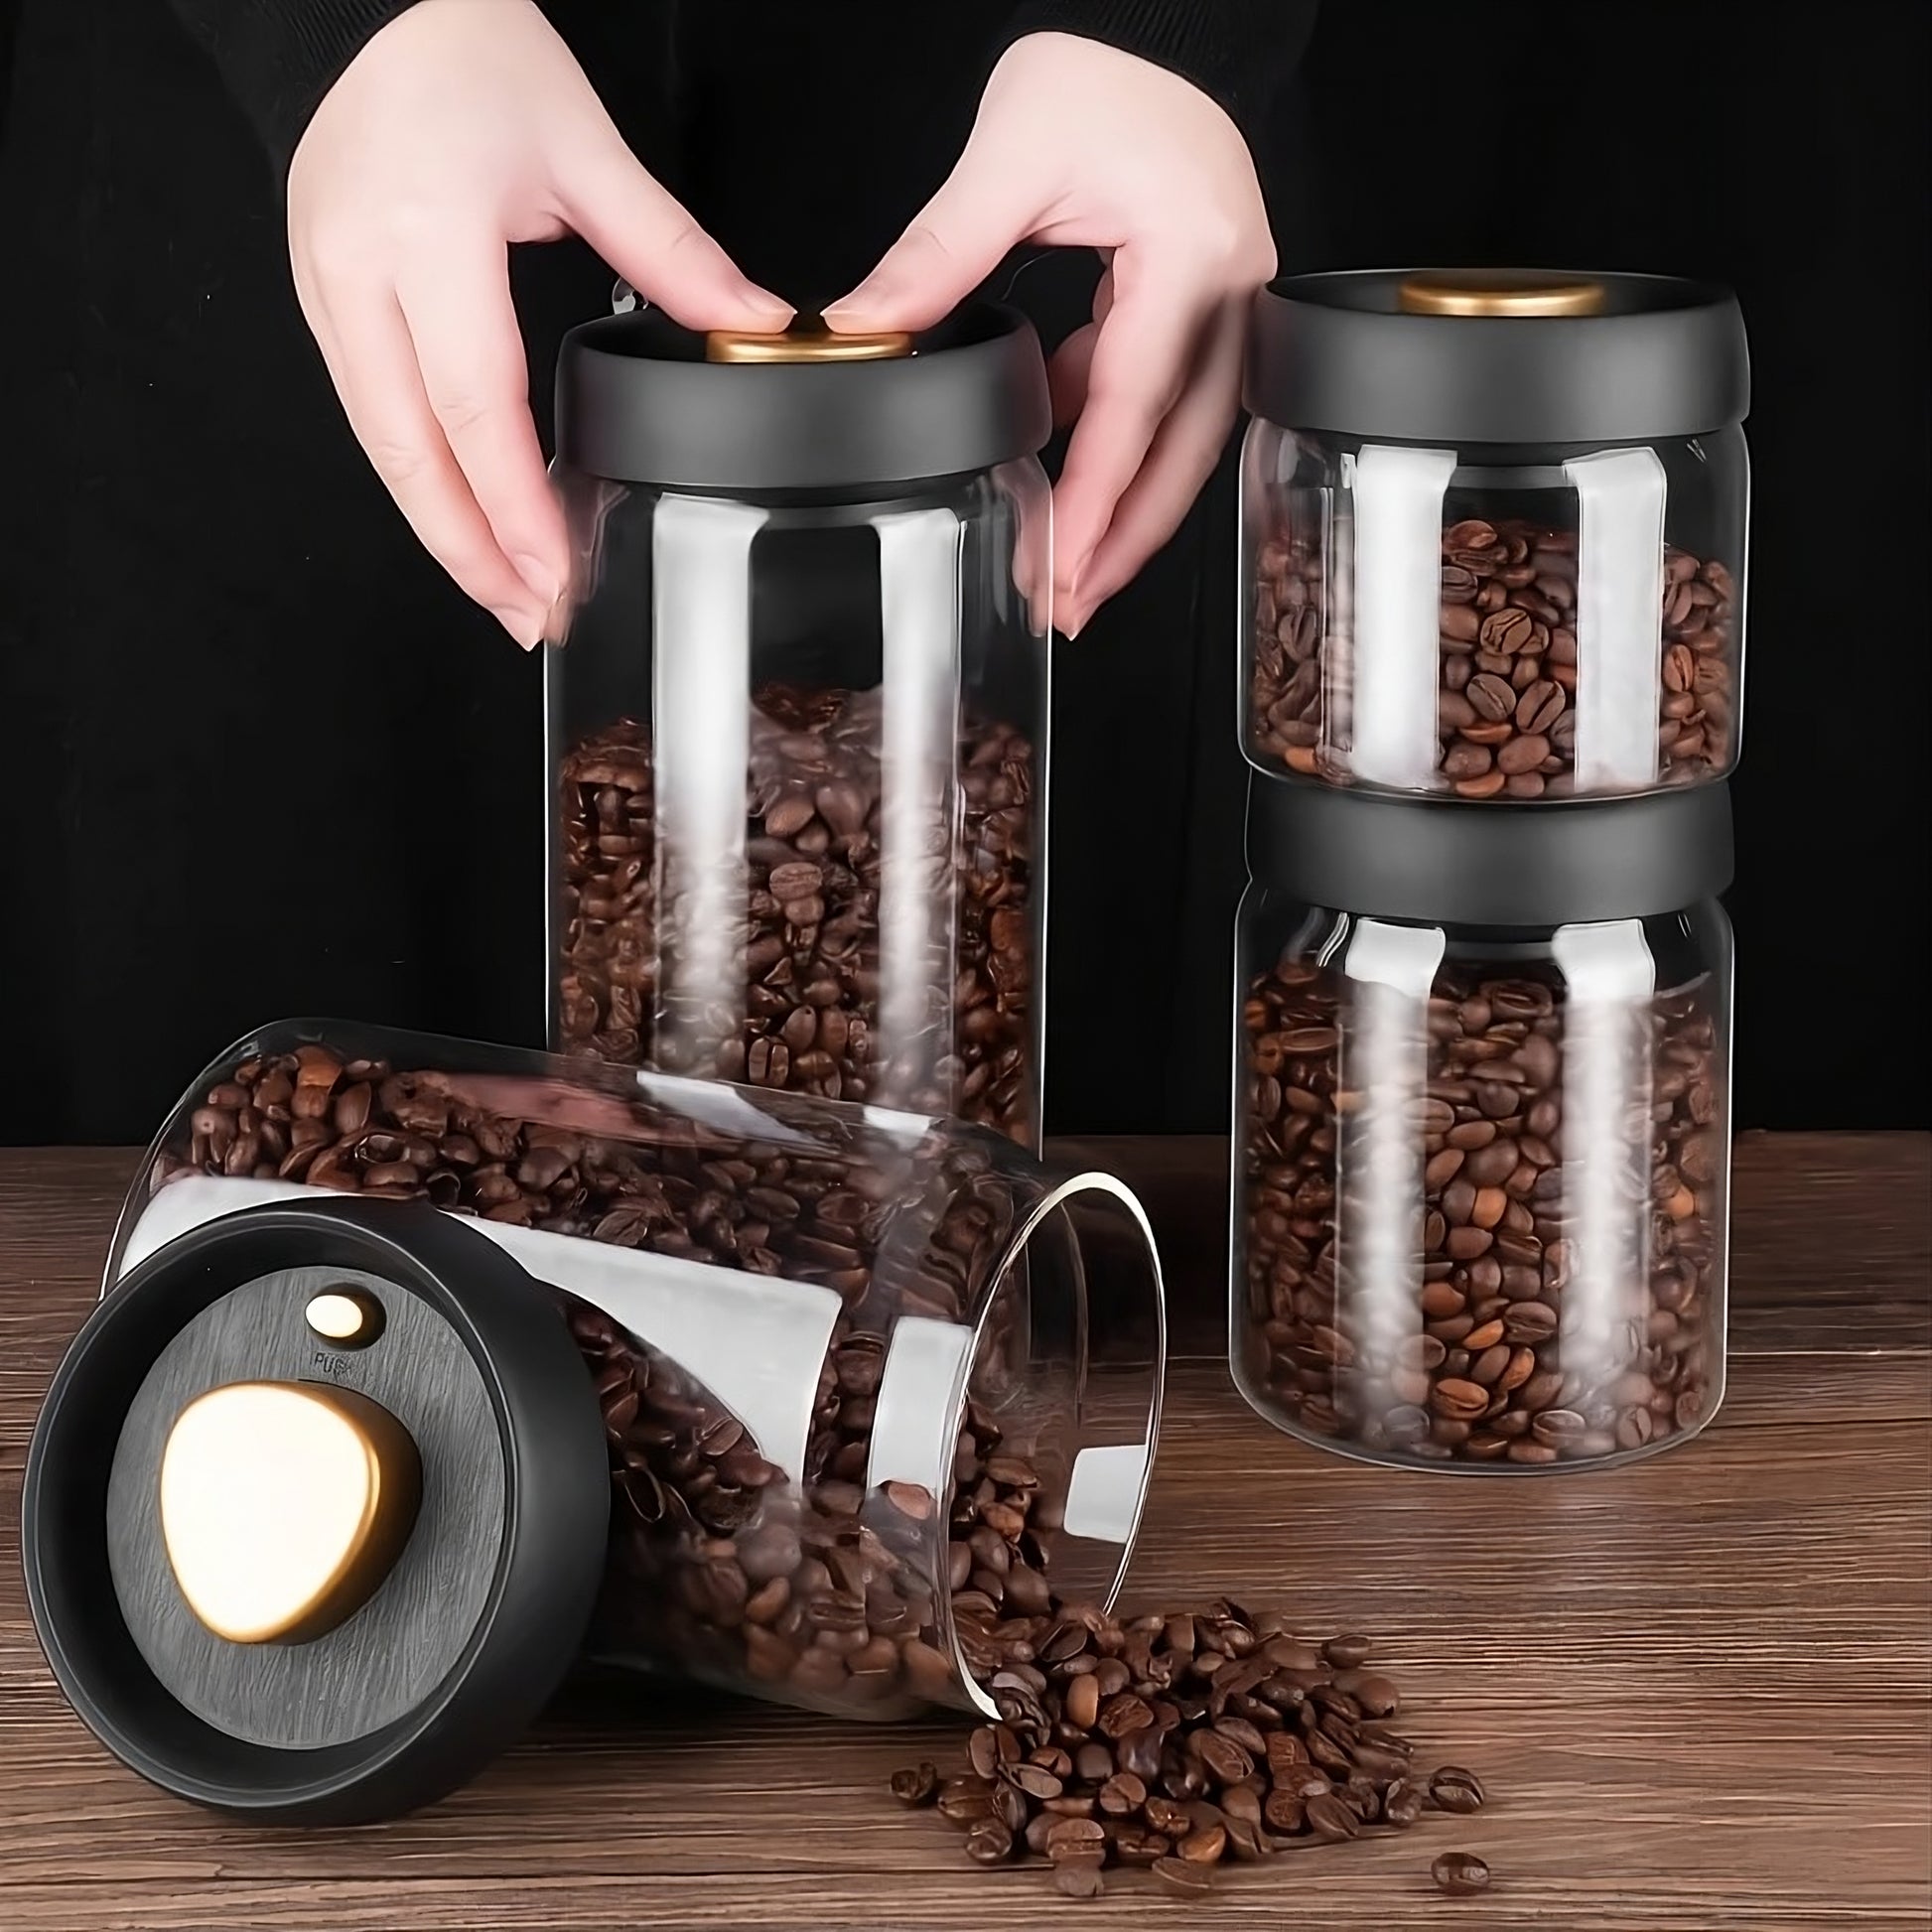 showcasing the glass jars in different sizes and stacked with coffee beans as content